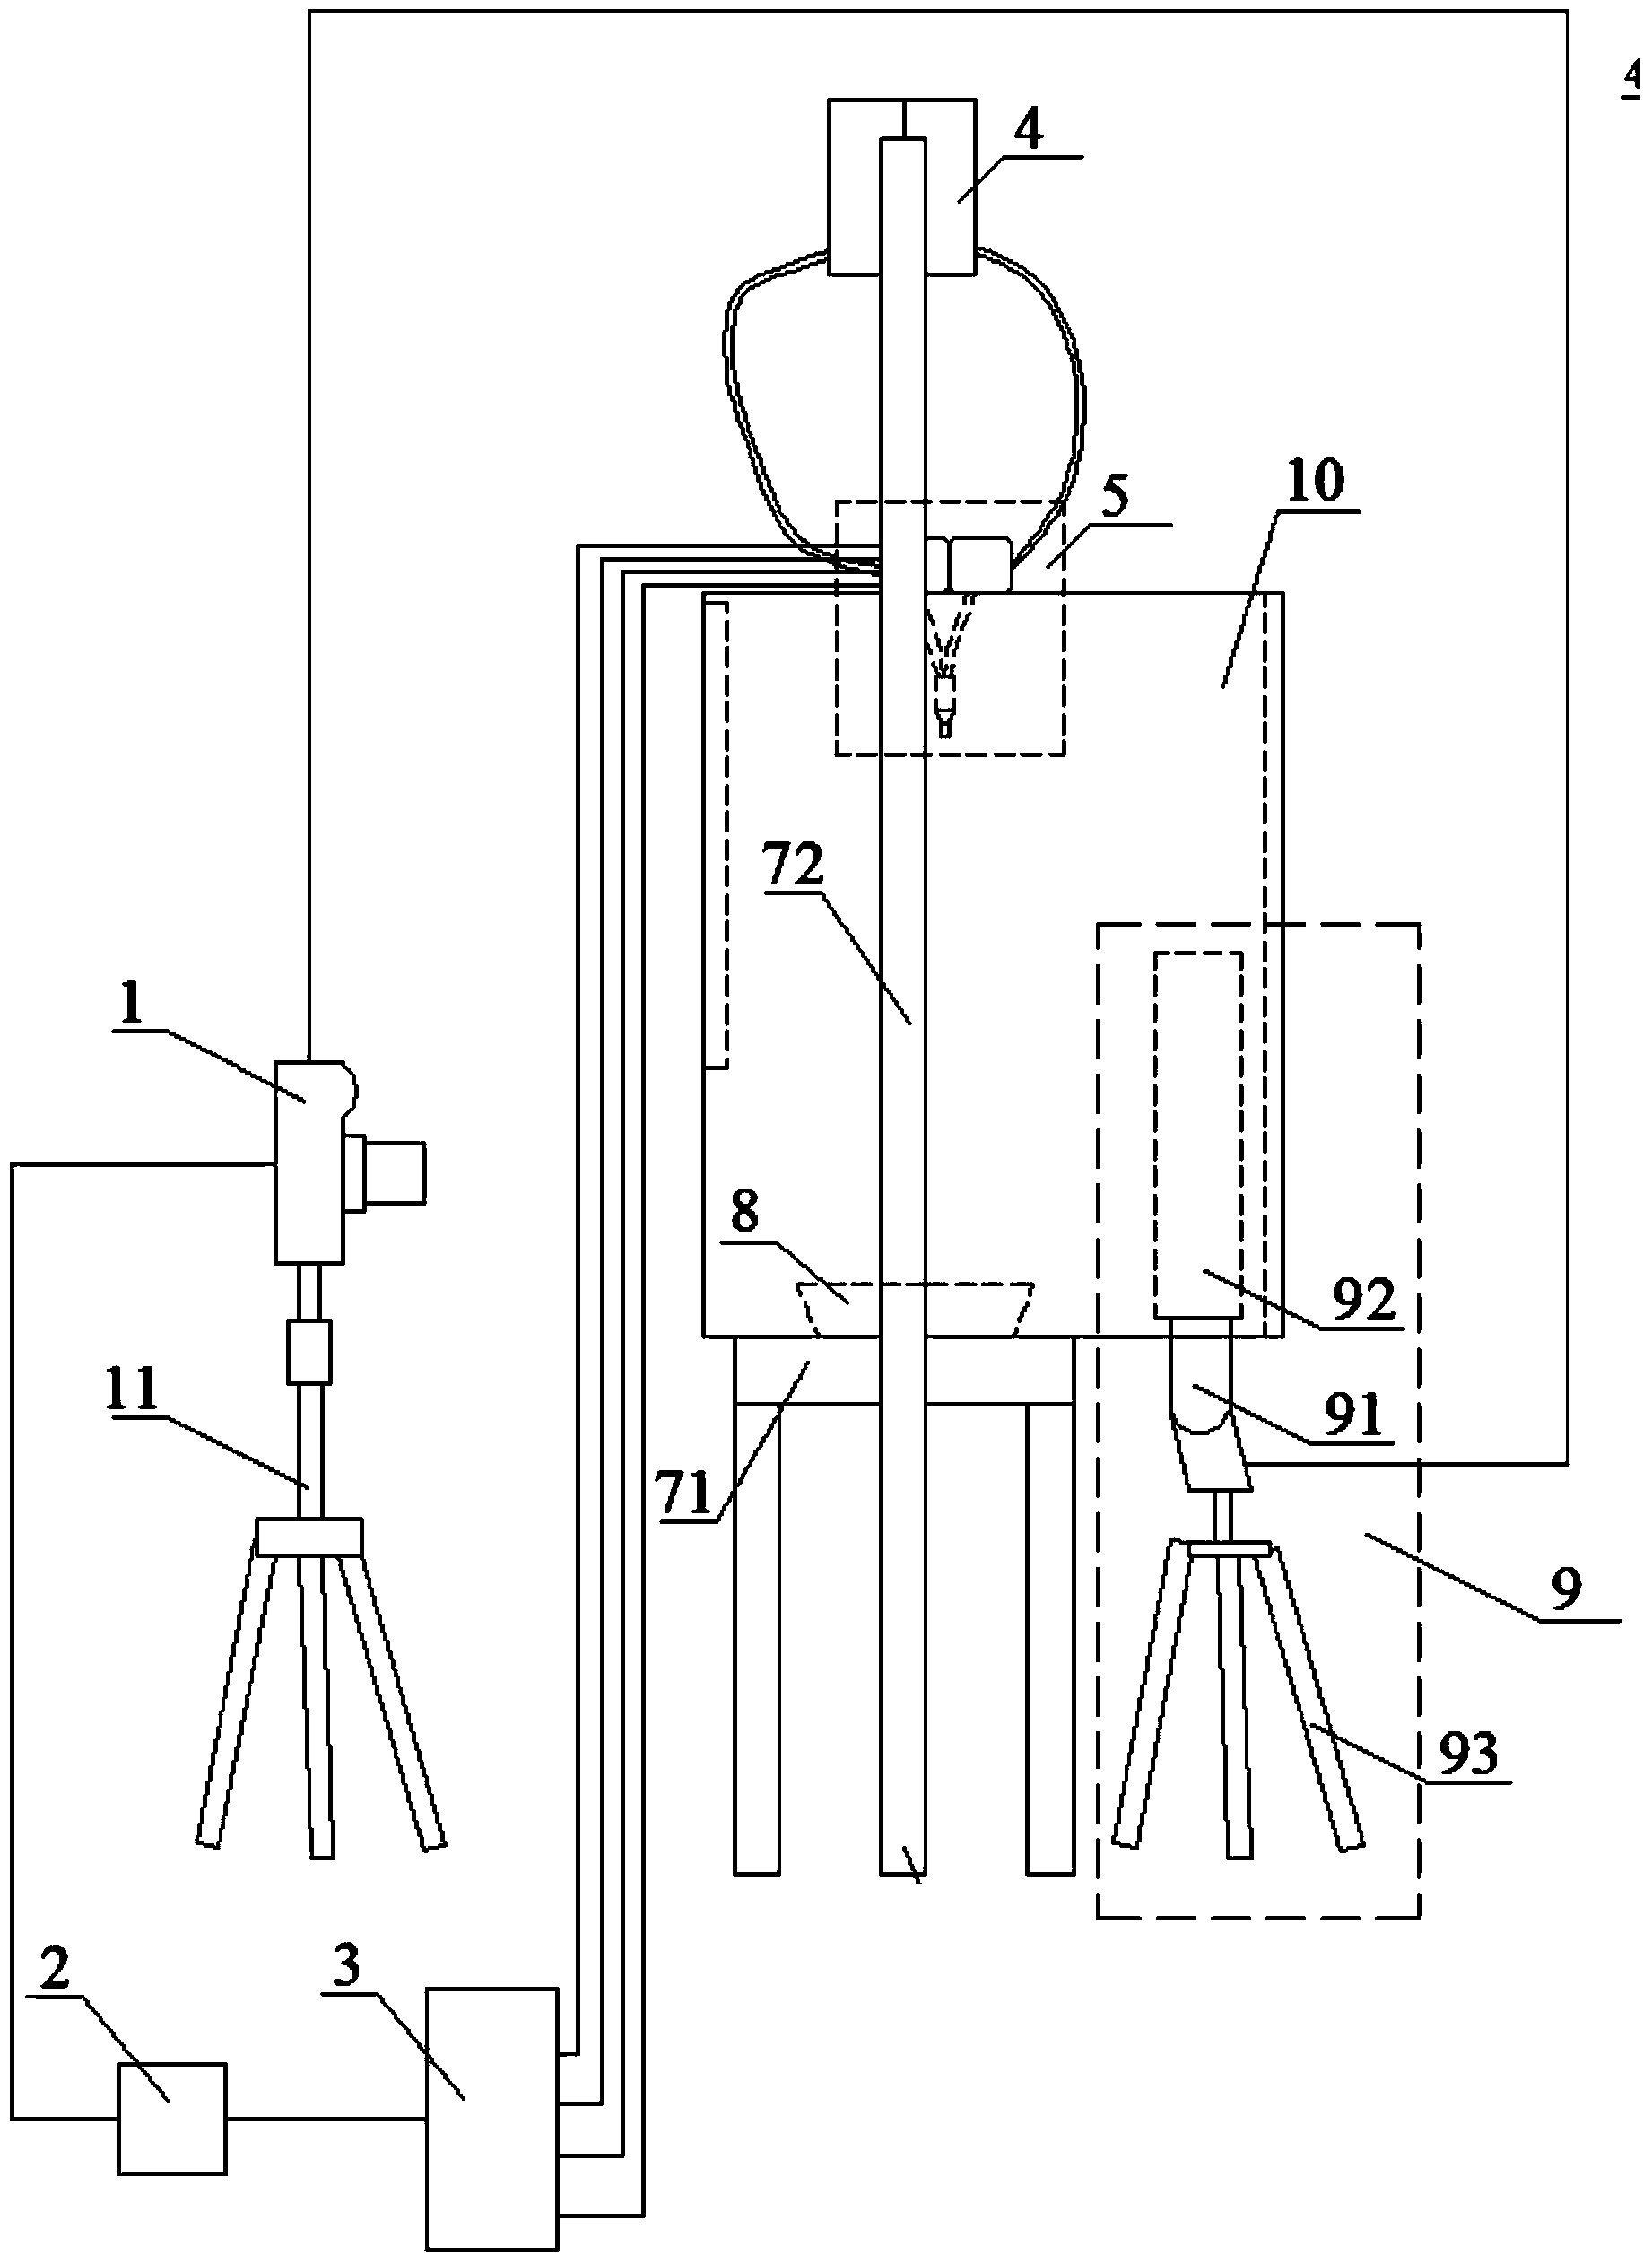 Water drip collision automatic photo taking device